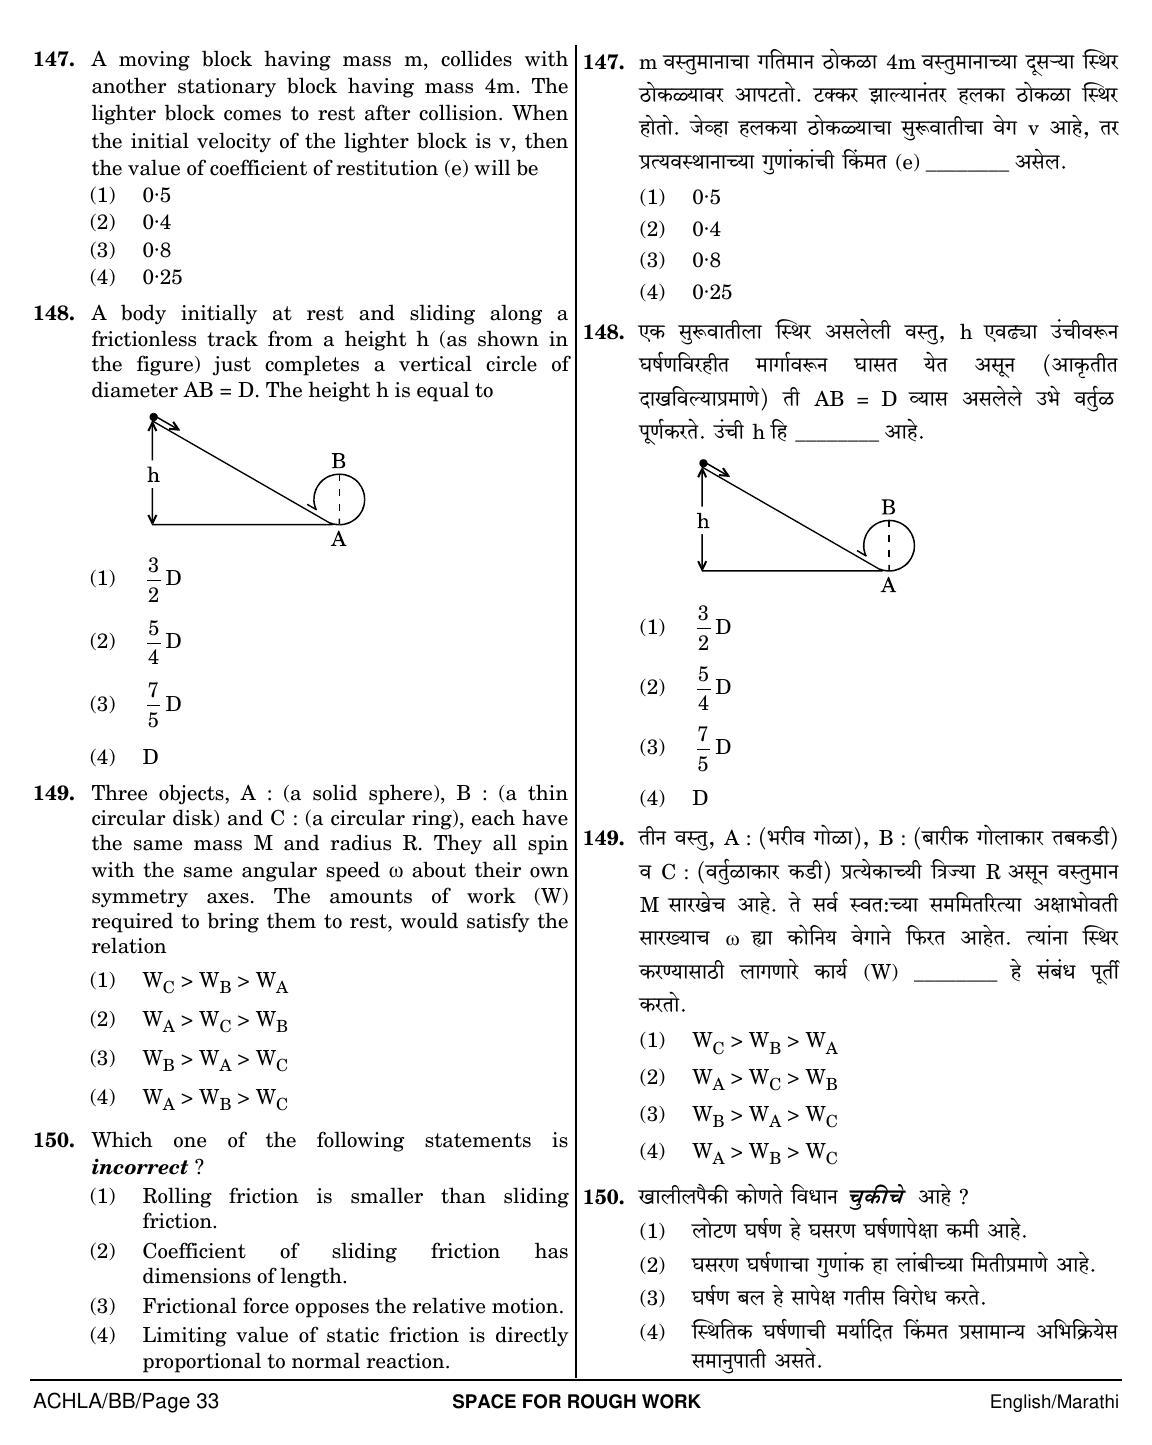 NEET Marathi BB 2018 Question Paper - Page 33